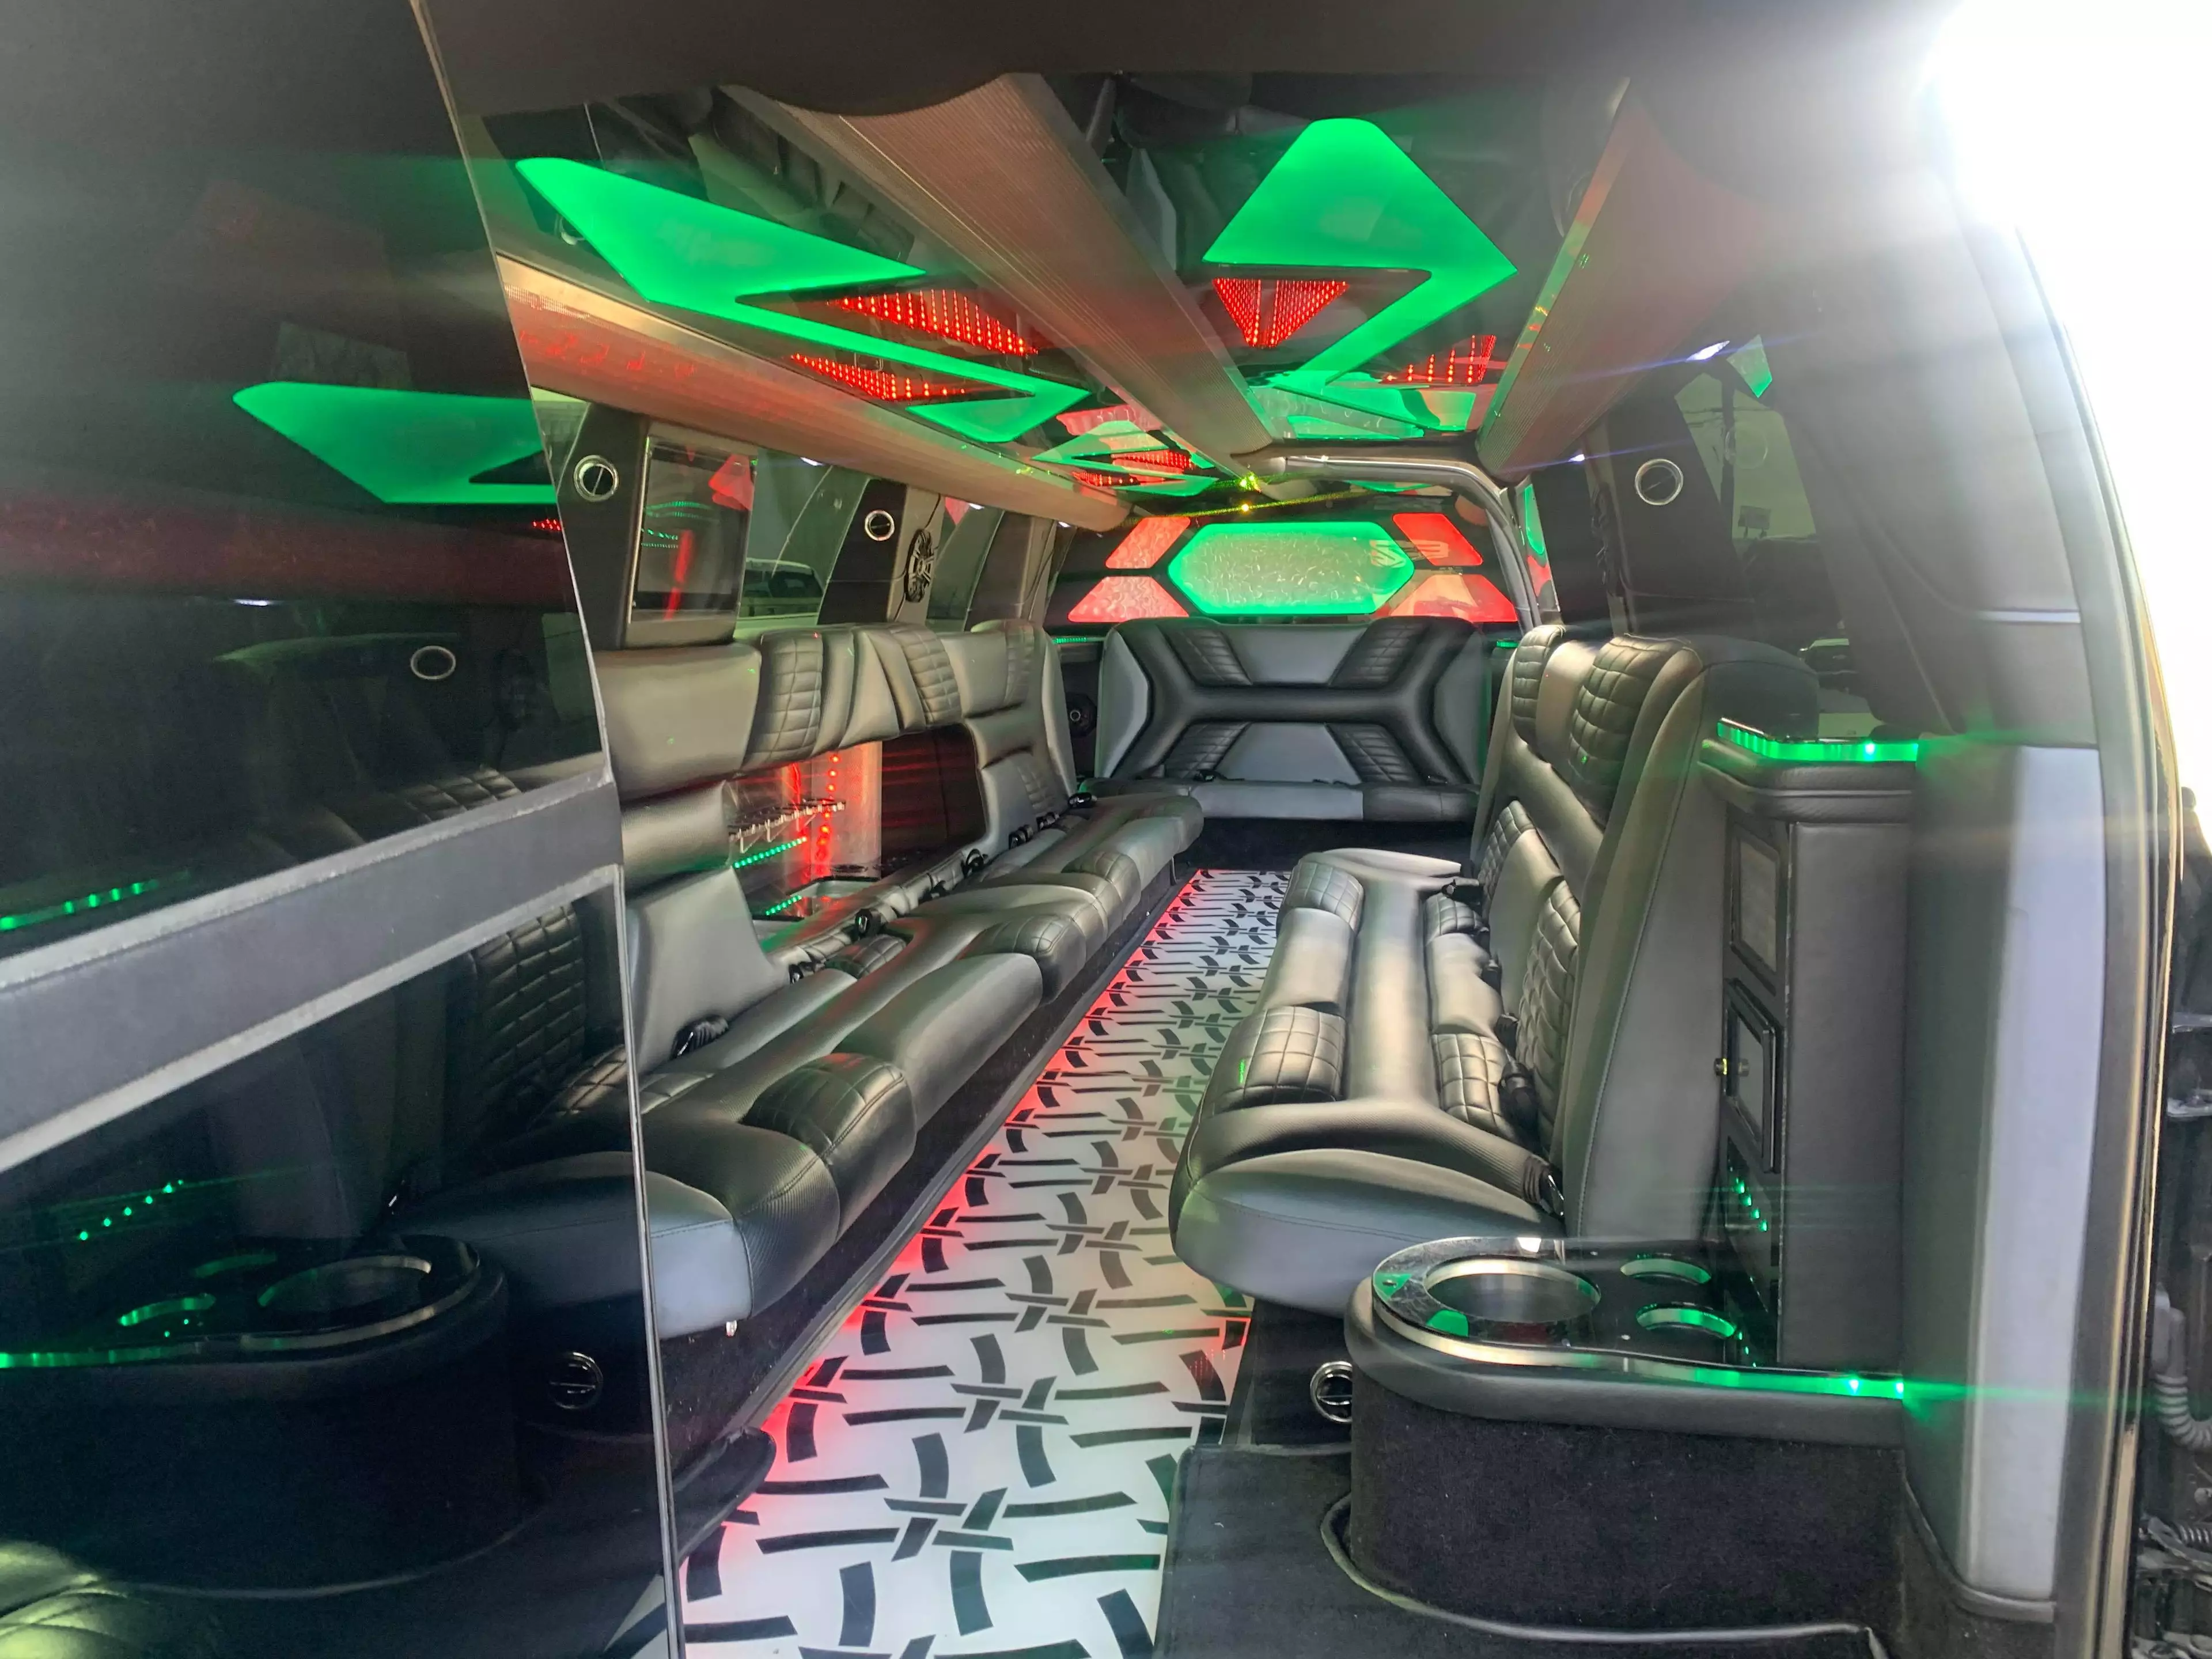 The inside of the limo that was waiting for Joe Exotic.